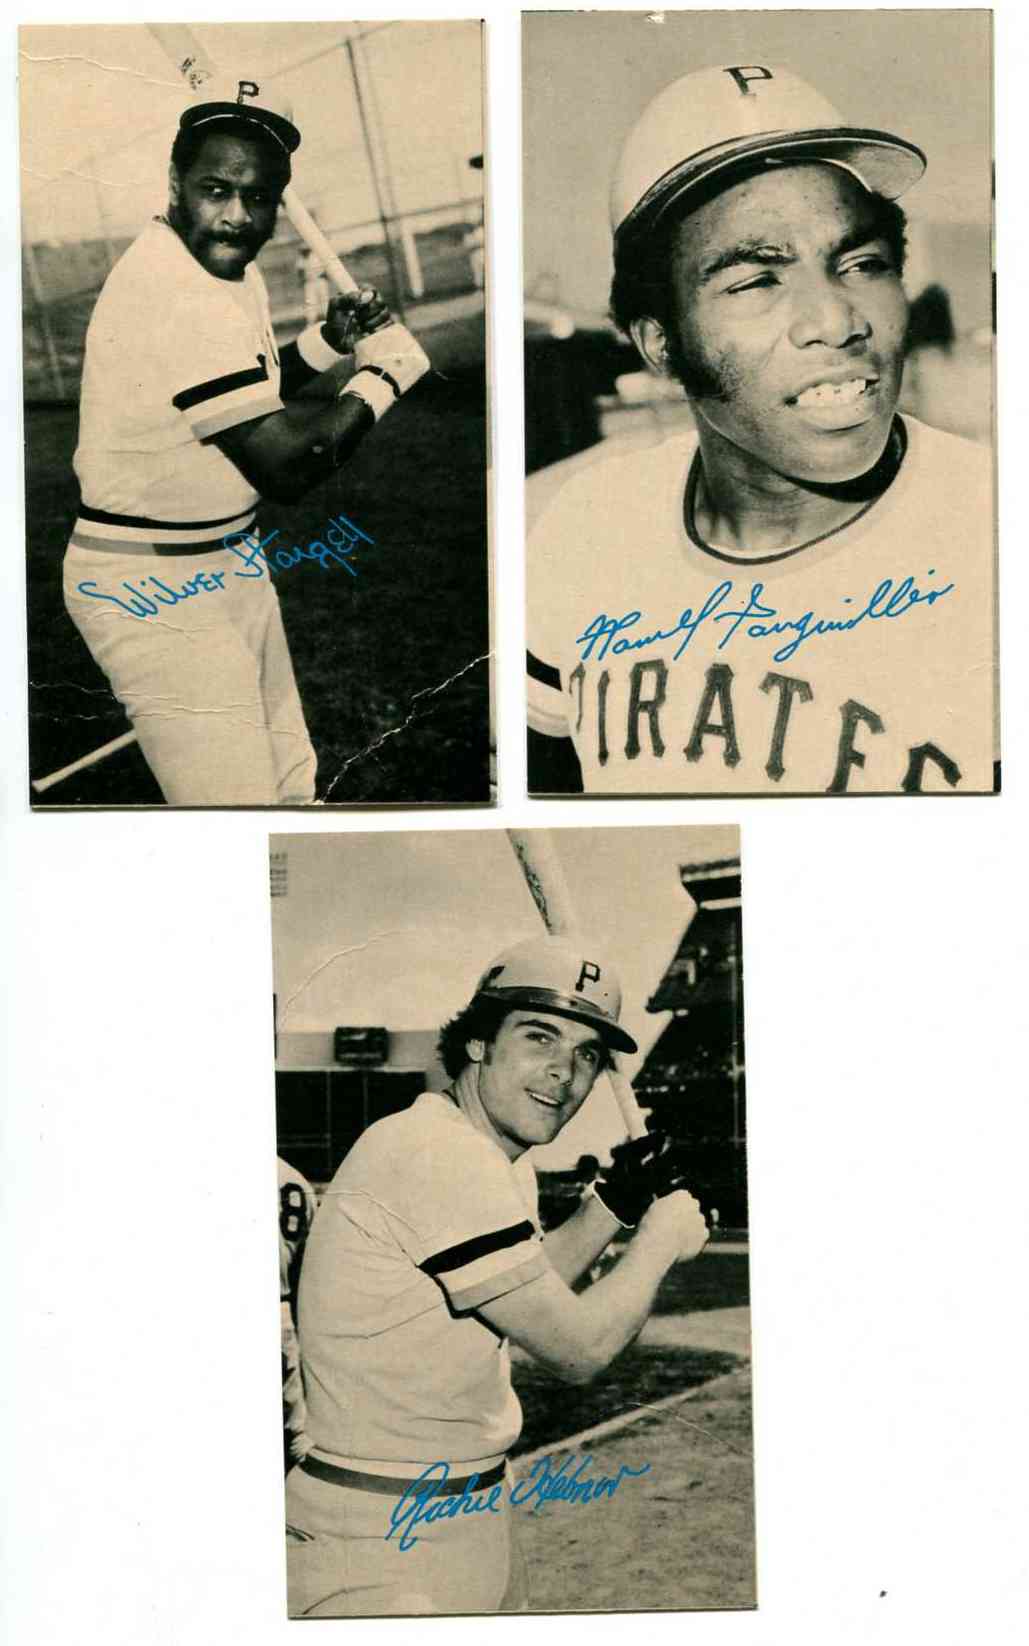  Pirates Team Set - 1974 Topps Deckle Edge PROOFS [WB] (3 cards) w/STARGELL Baseball cards value